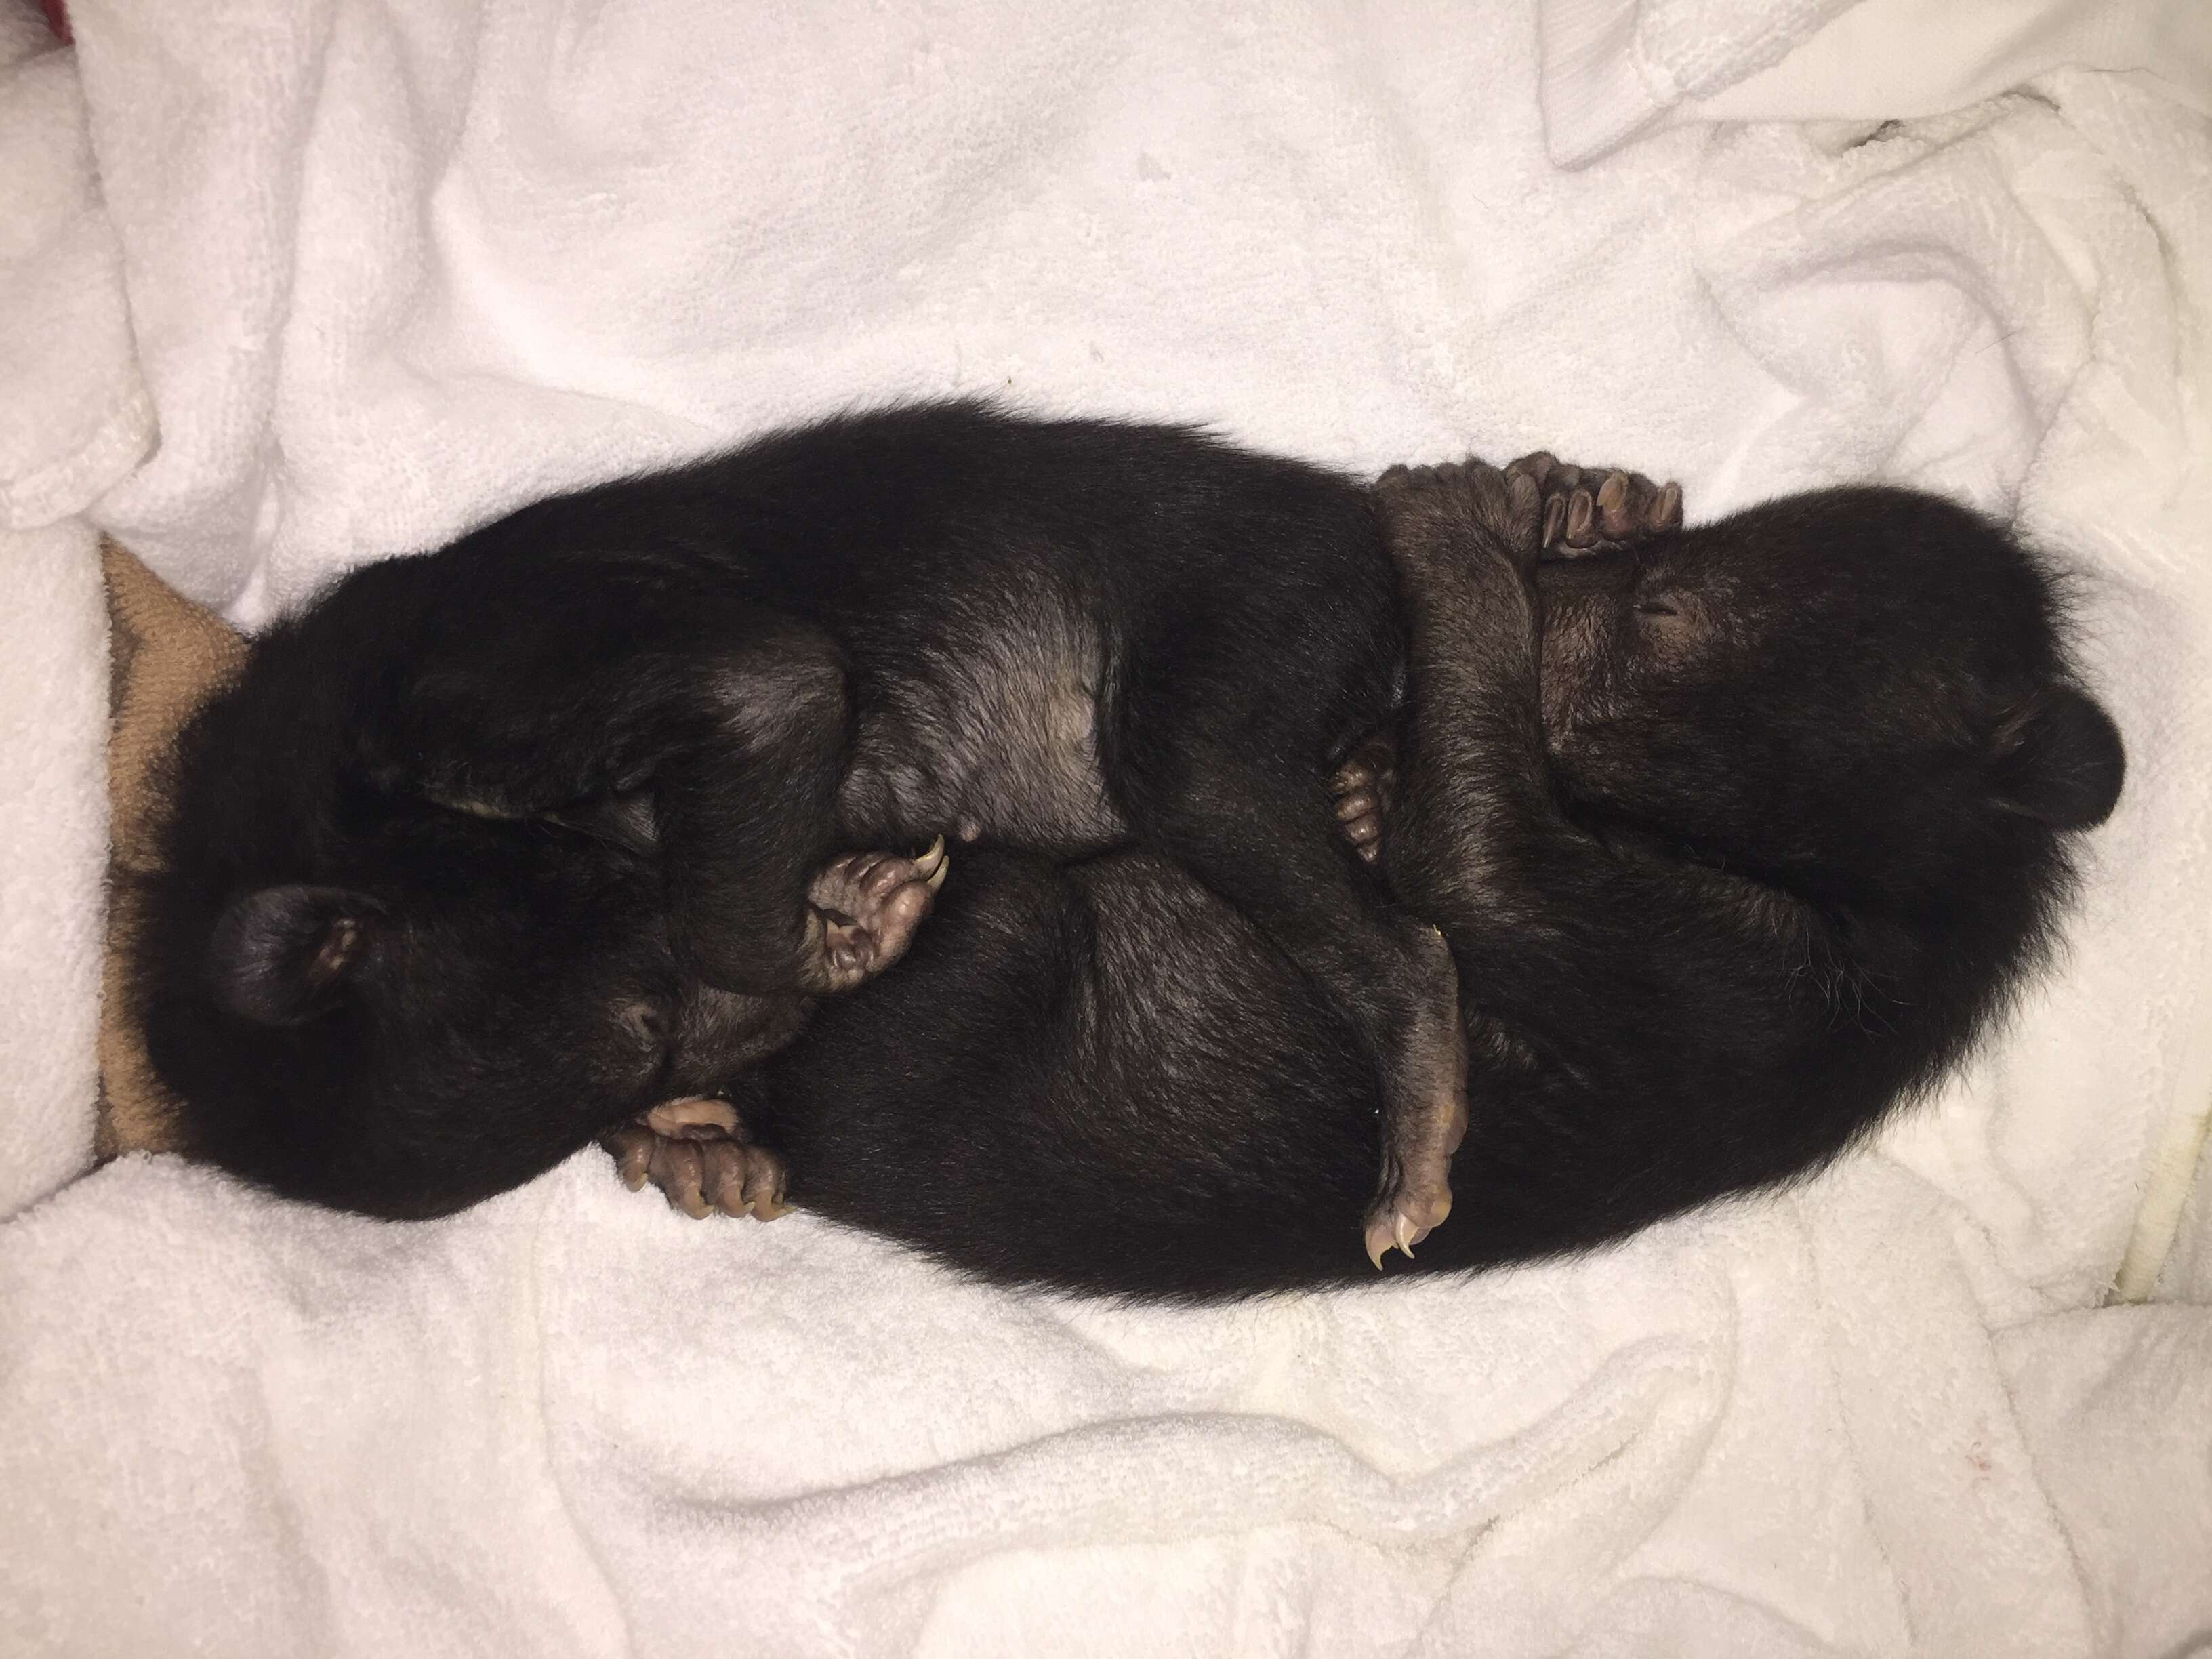 Asiatic black bear cubs saved from traffickers in Vietnam